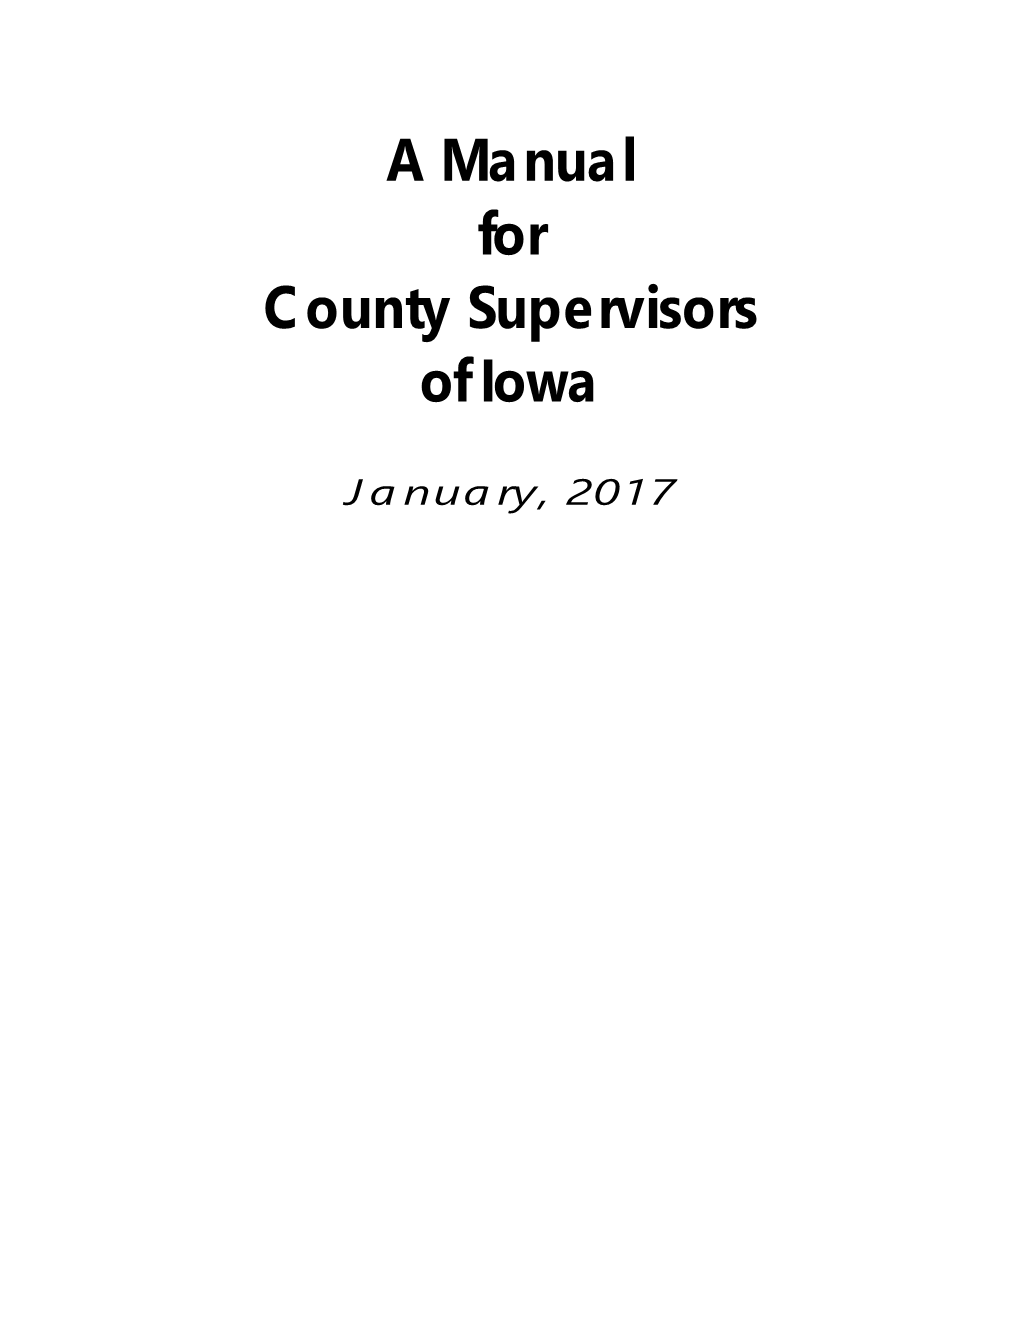 A Manual for County Supervisors of Iowa